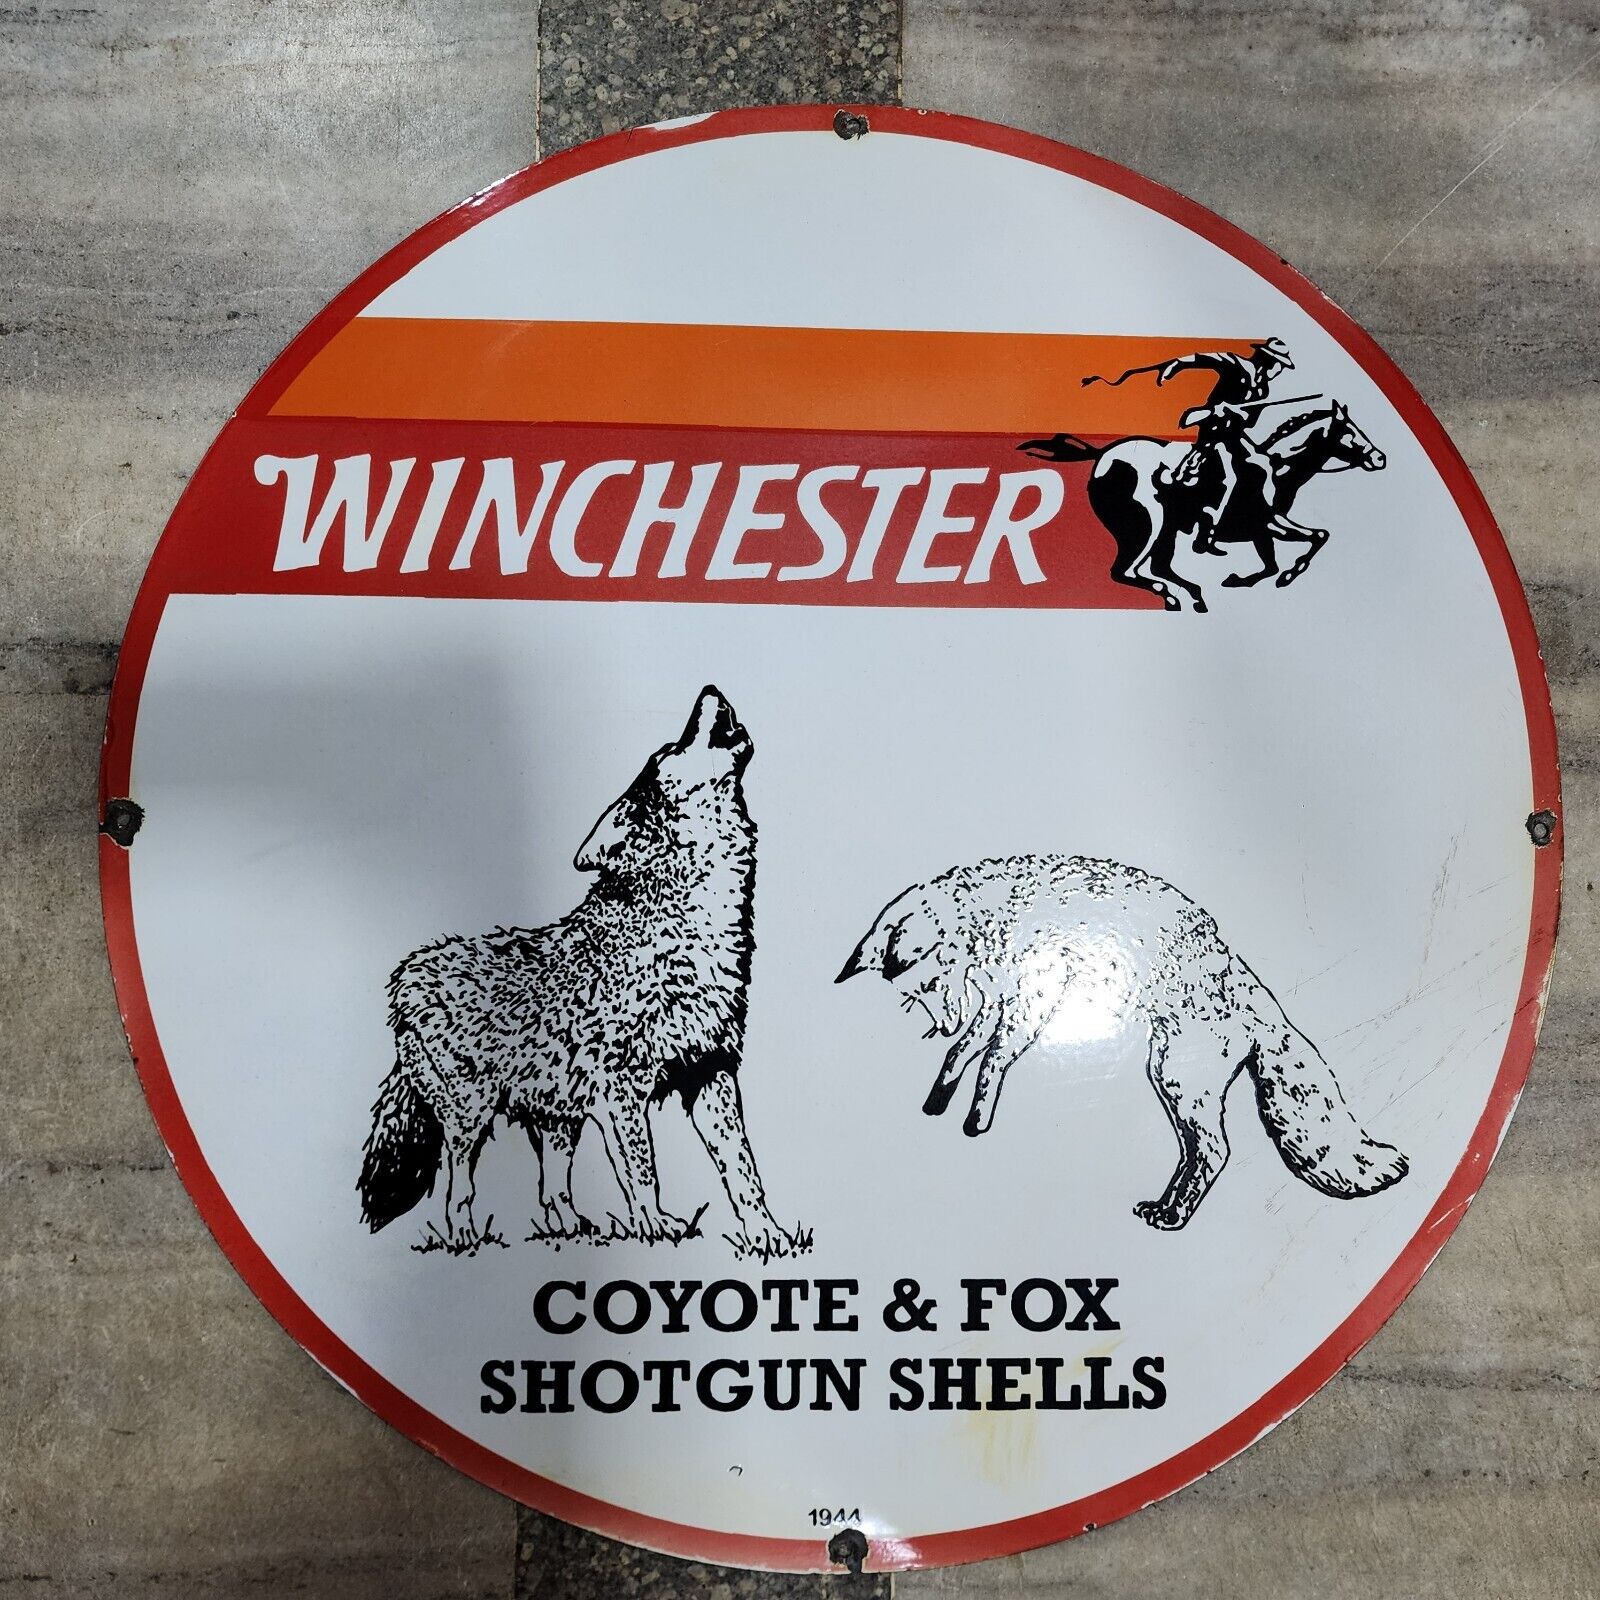 WINCHESTER COYOTE & FOX PORCELAIN ENAMEL SIGN 30 INCHES ROUND